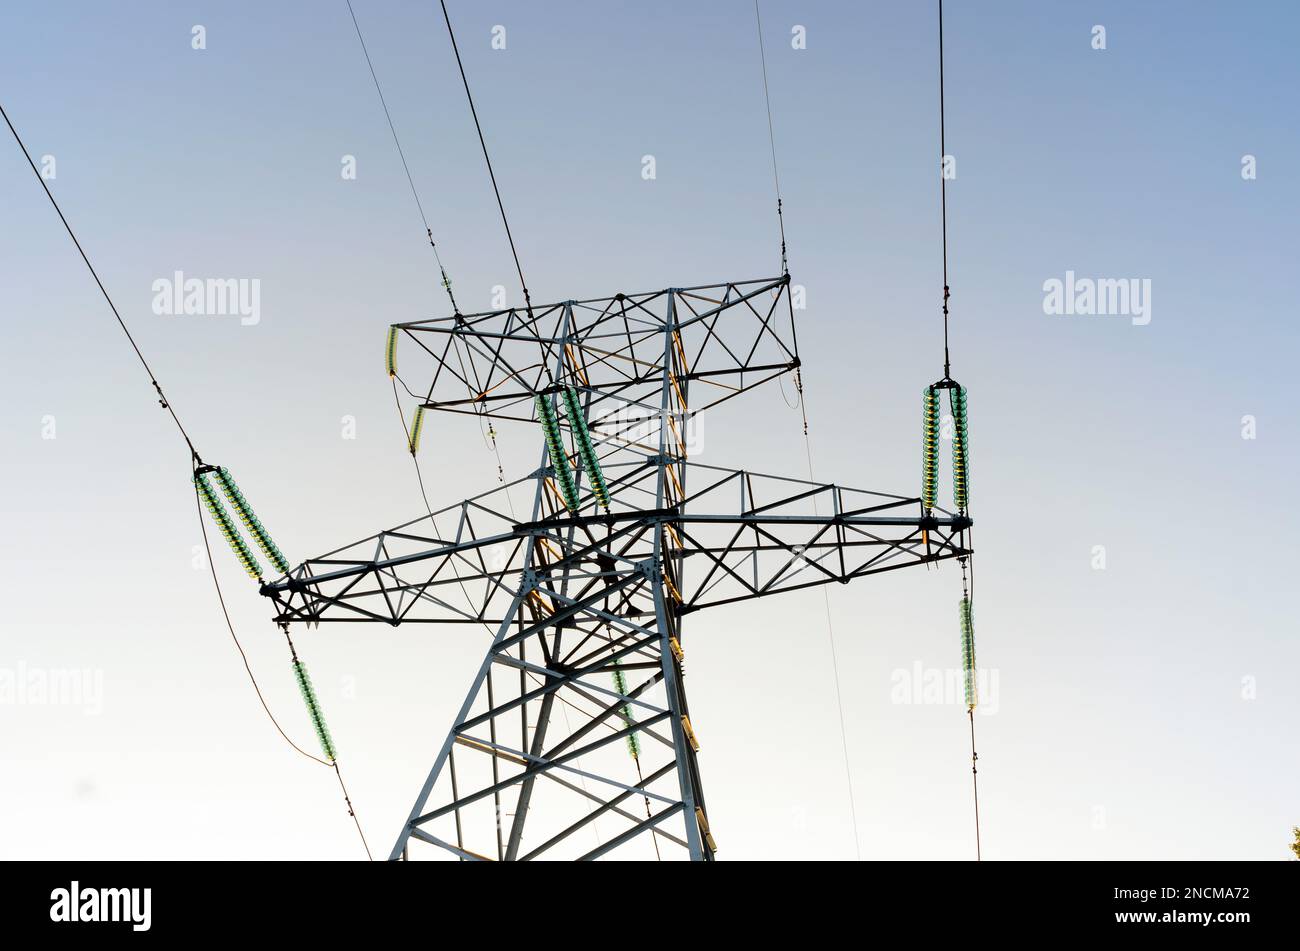 The tip end anchor metal supports of overhead power lines costs with wires and bundles of strands of high-voltage insulators against Stock Photo